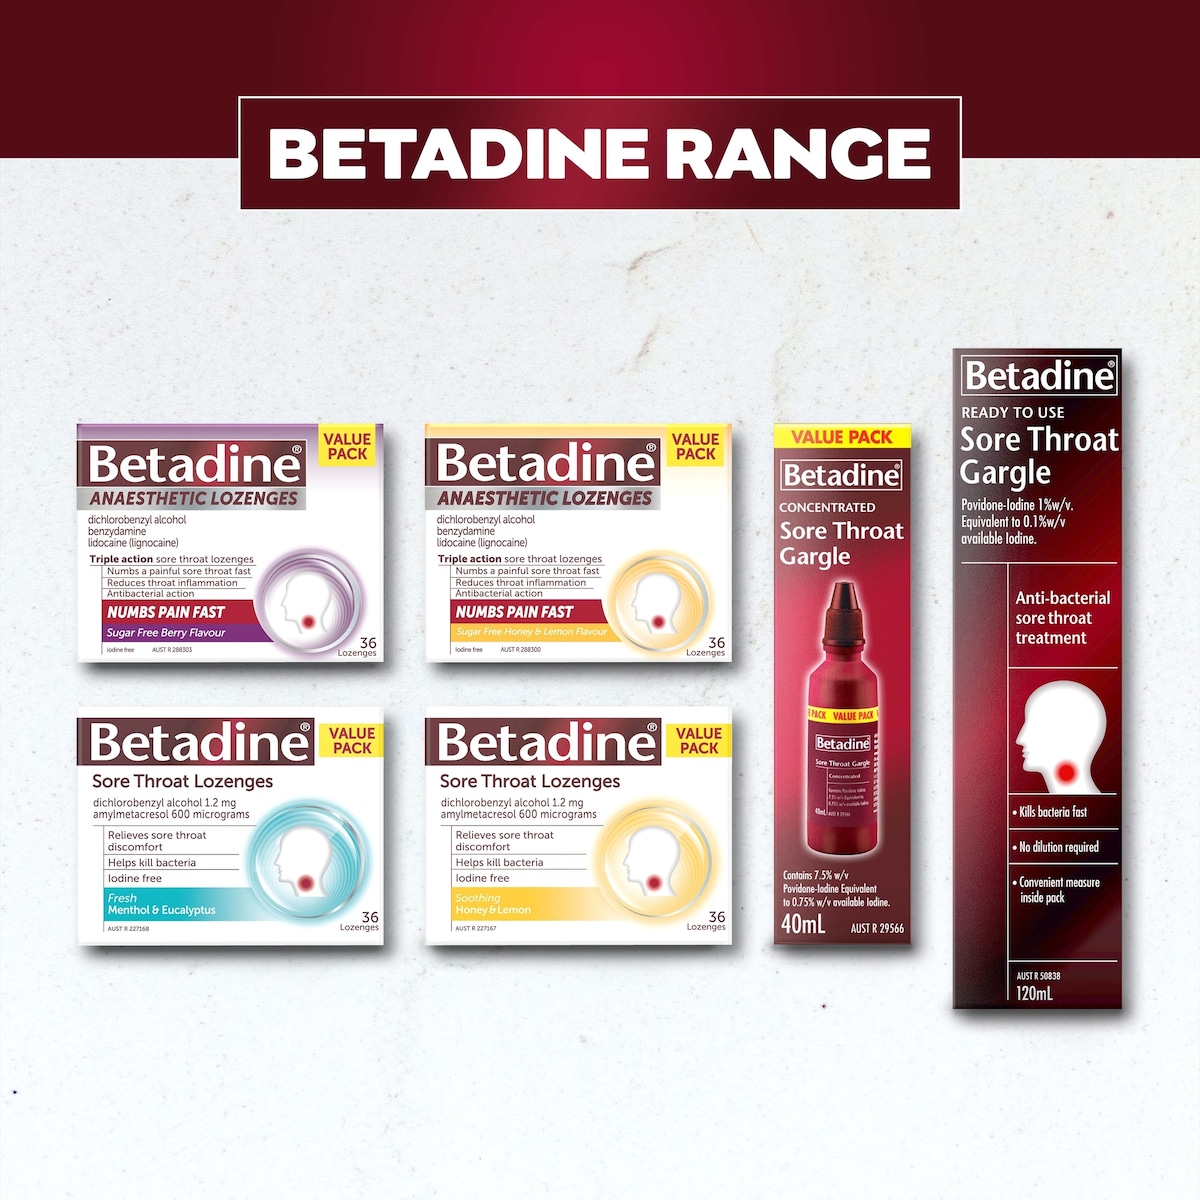 Betadine Sore Throat Gargle Concentrated 40Ml